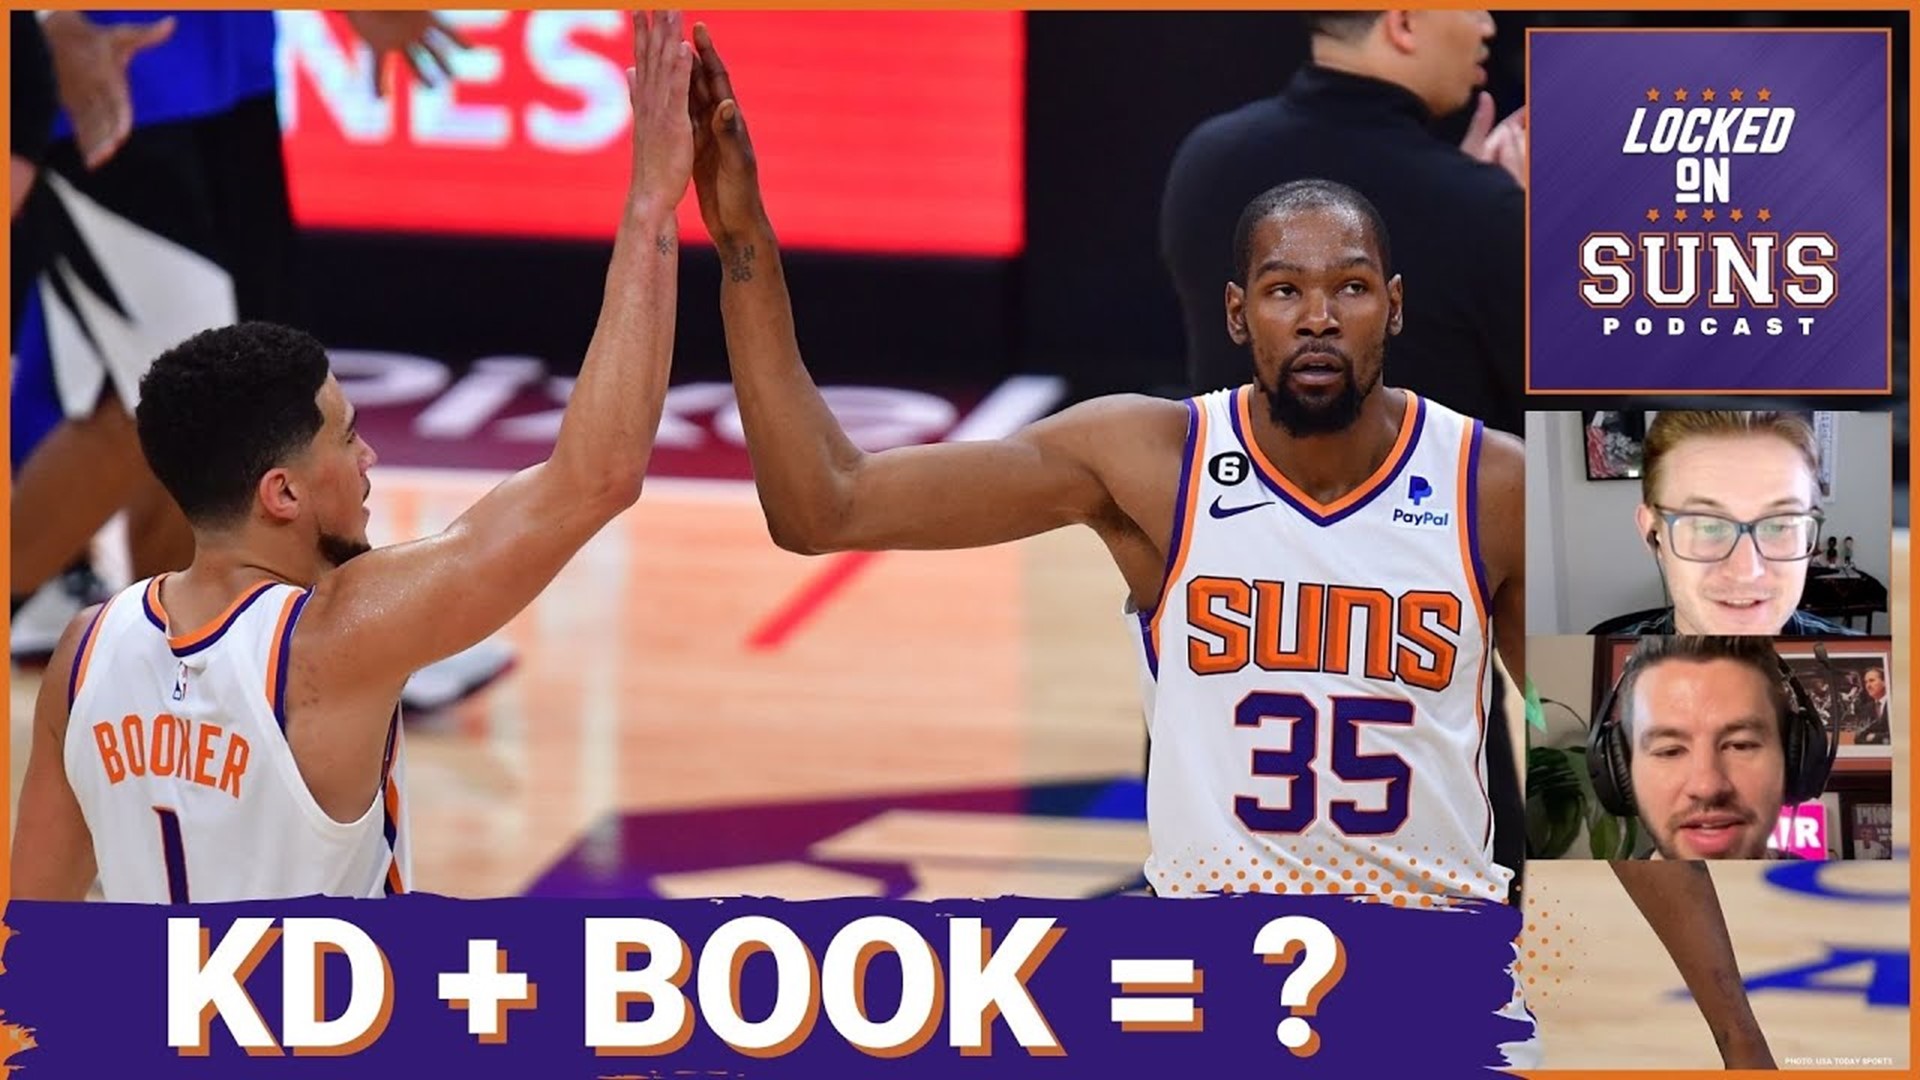 Phoenix Suns stars Devin Booker and Kevin Durant are among the best duos in the NBA, but where exactly do they rank?